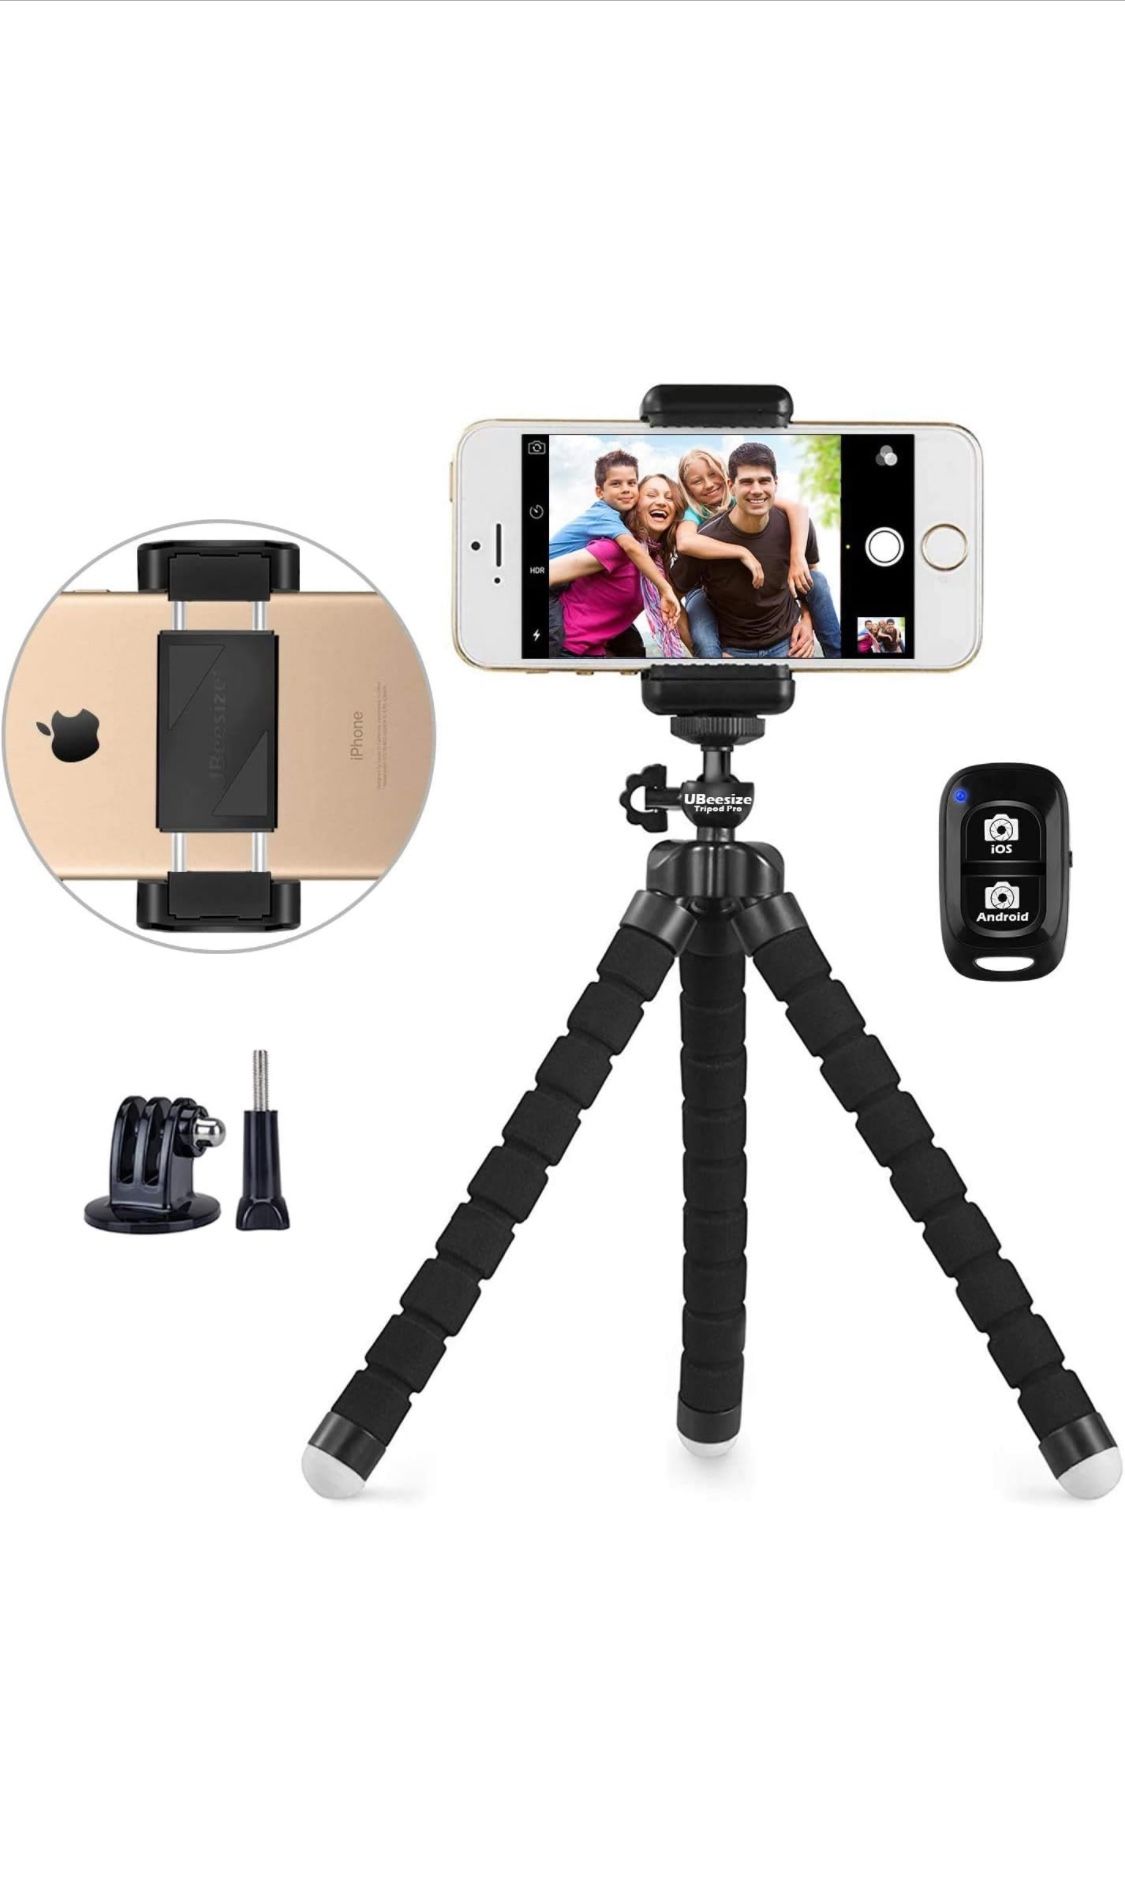 Flexible Mini Phone Tripod | Portable and Adjustable Camera Stand Holder | with Wireless Remote and